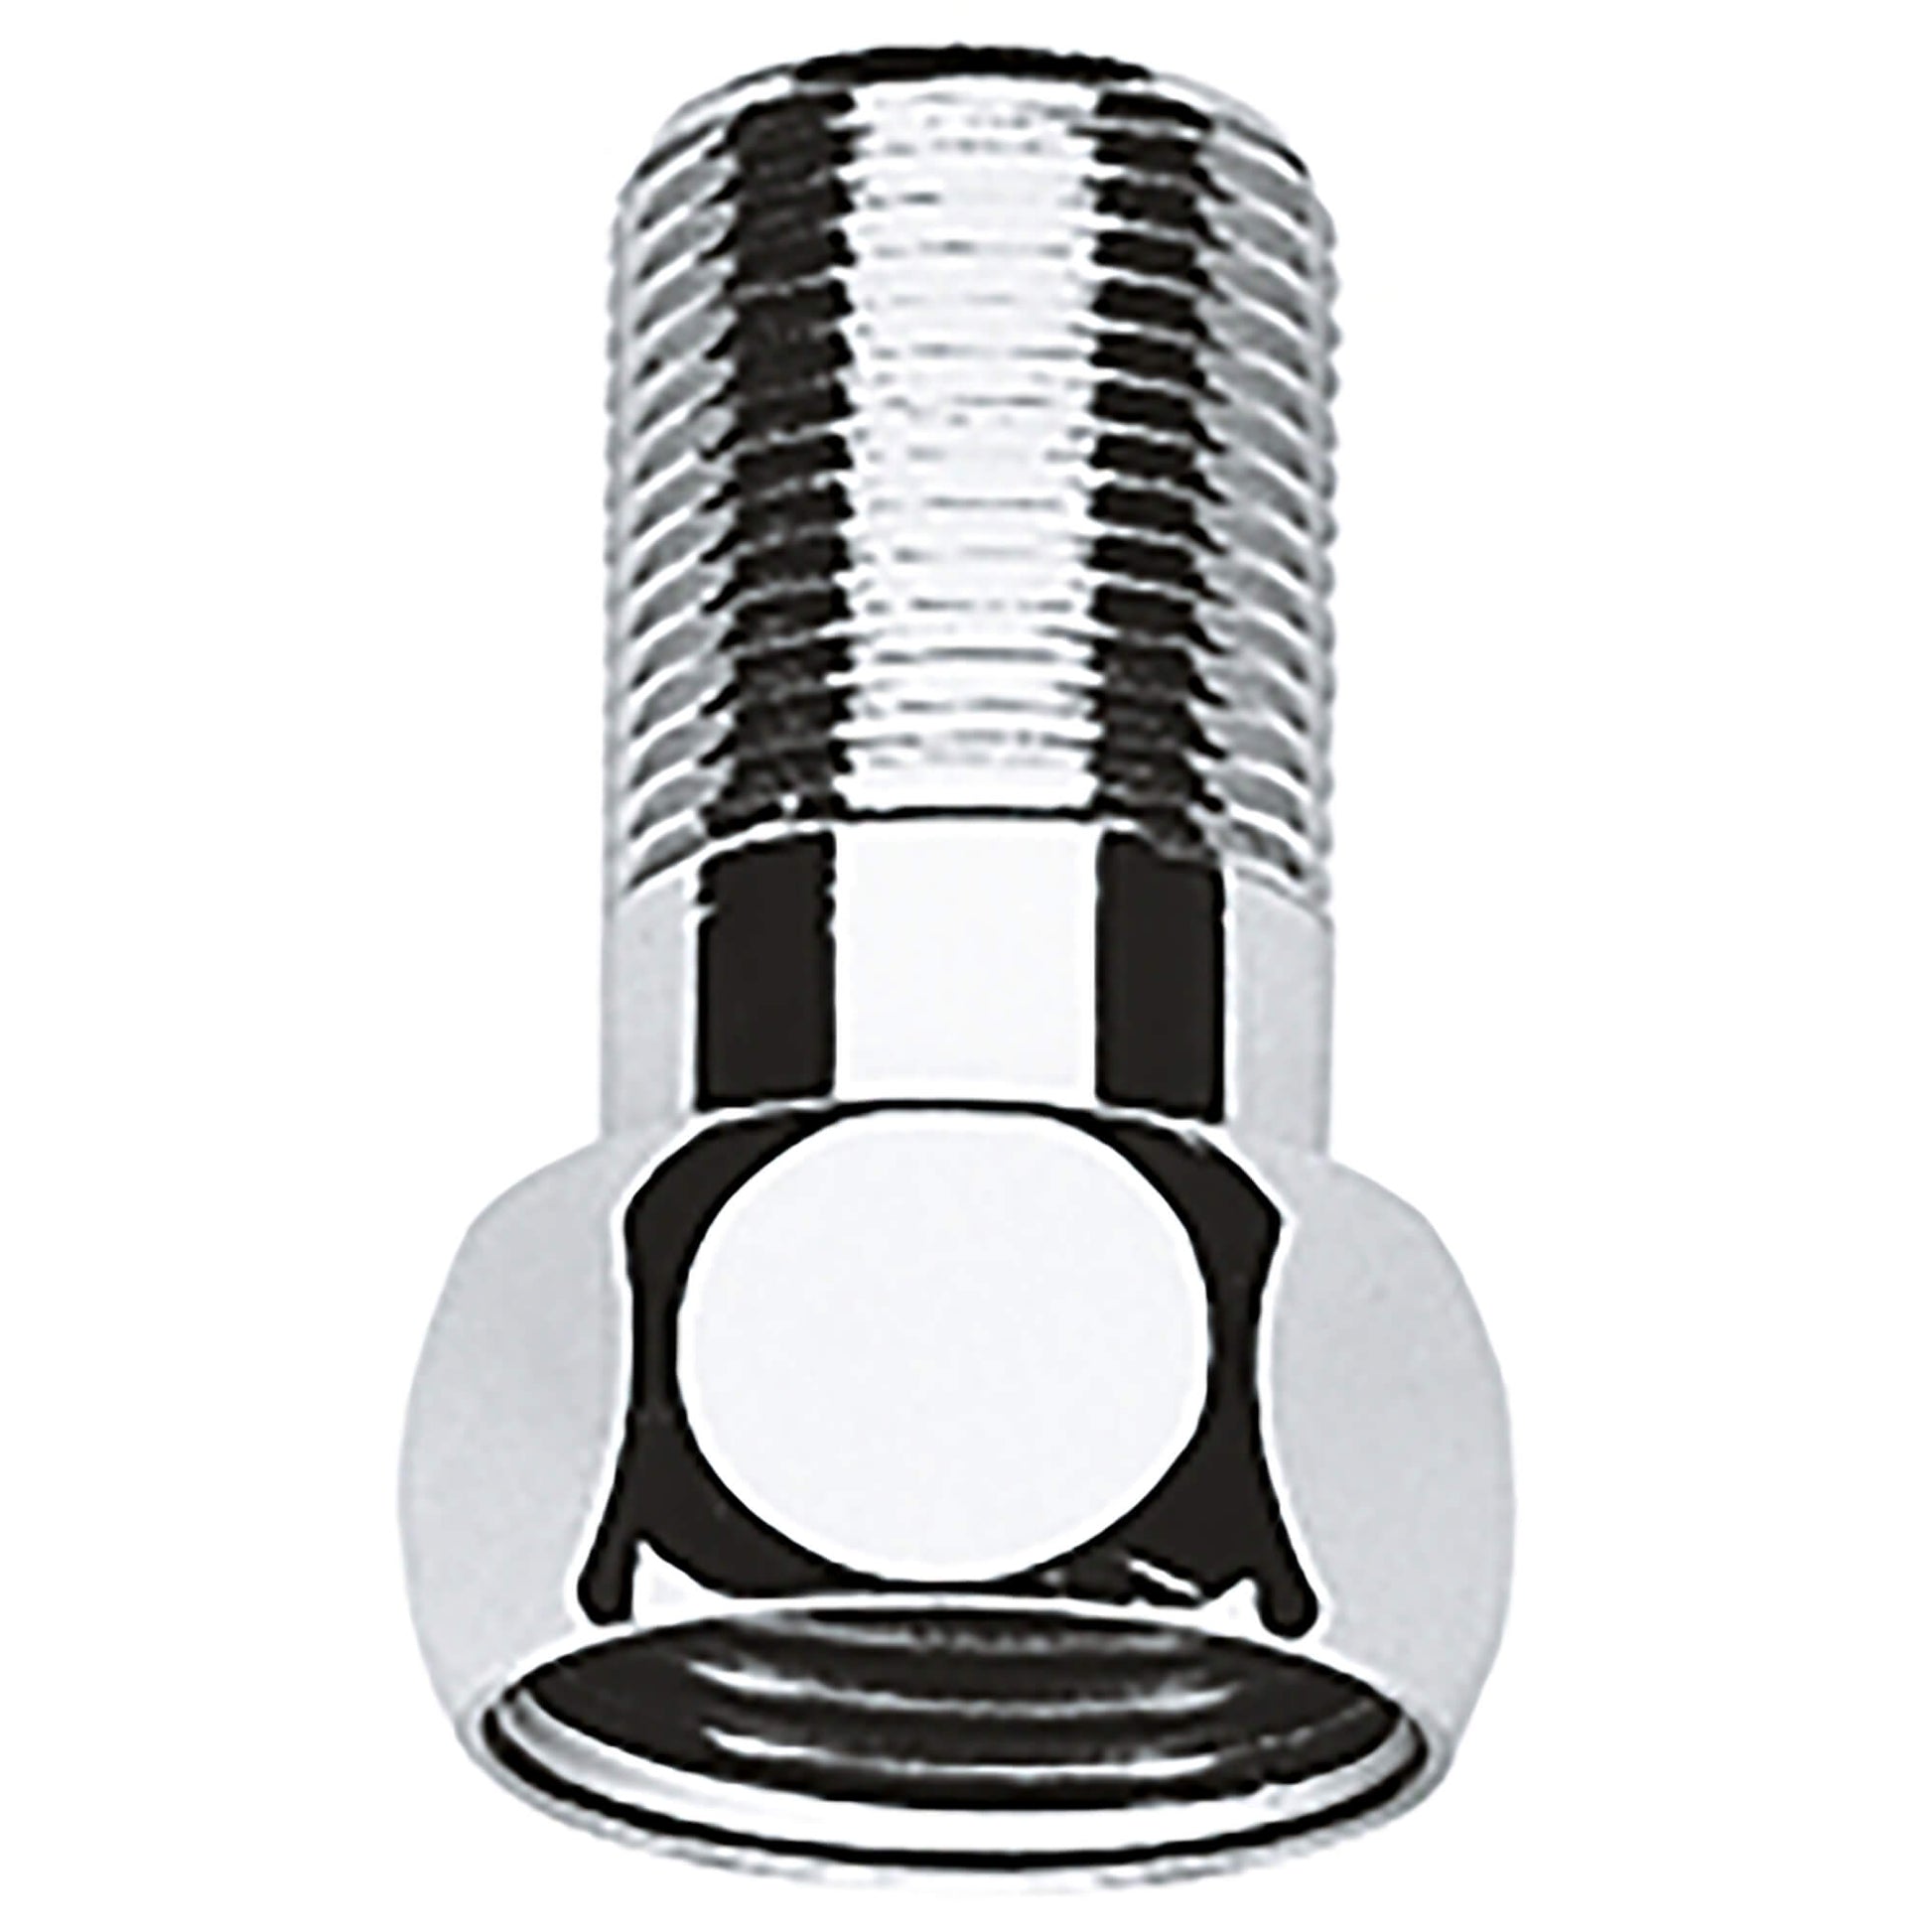 GROHE 12424000 Grohtherm Chrome Straight Union (1-1/4" With 1-1/2" Nut)